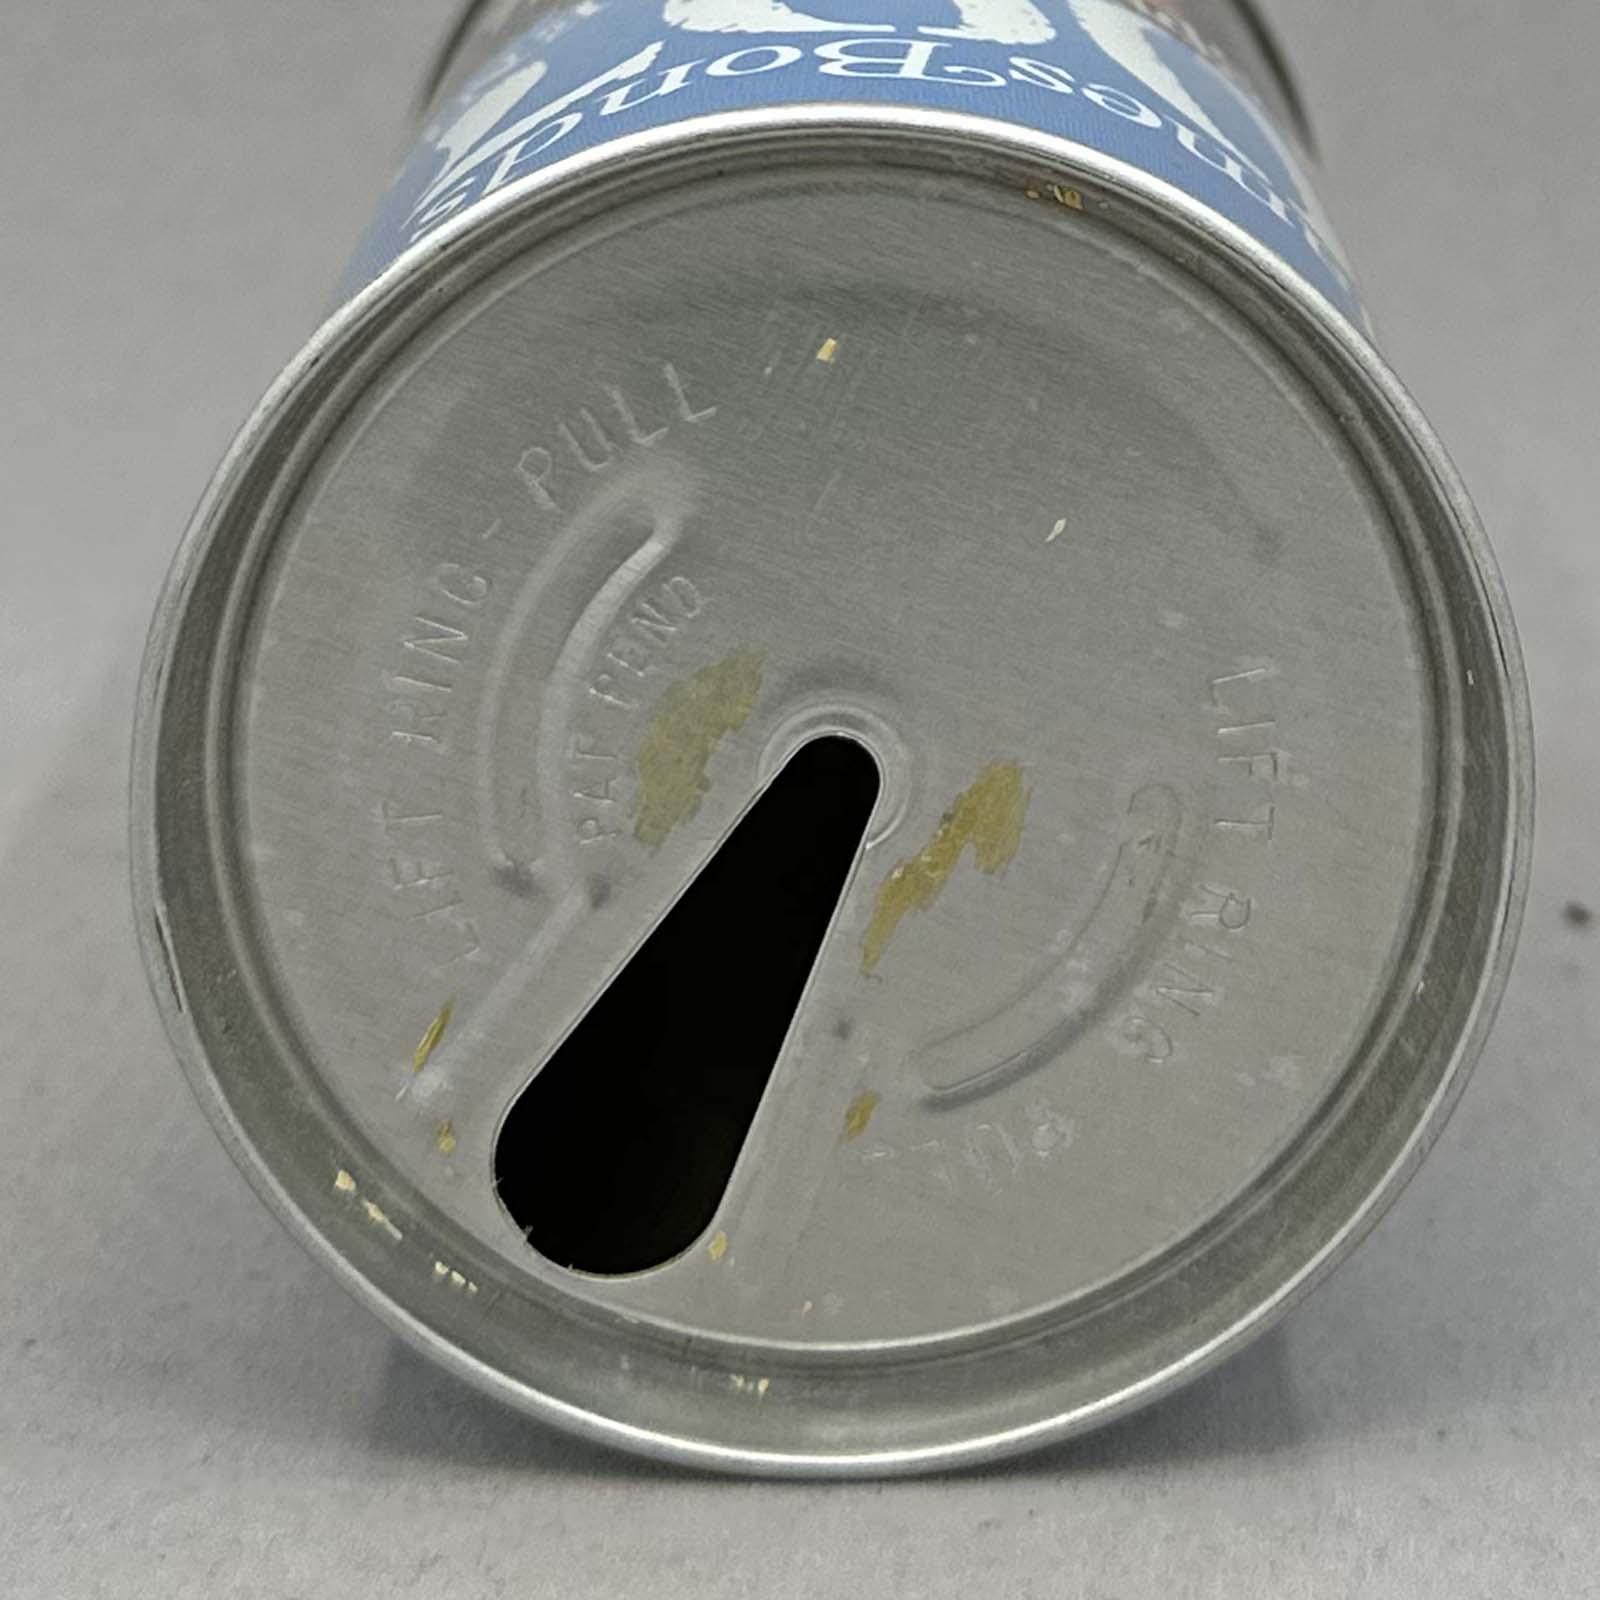 007 82-33 pull tab beer can 5